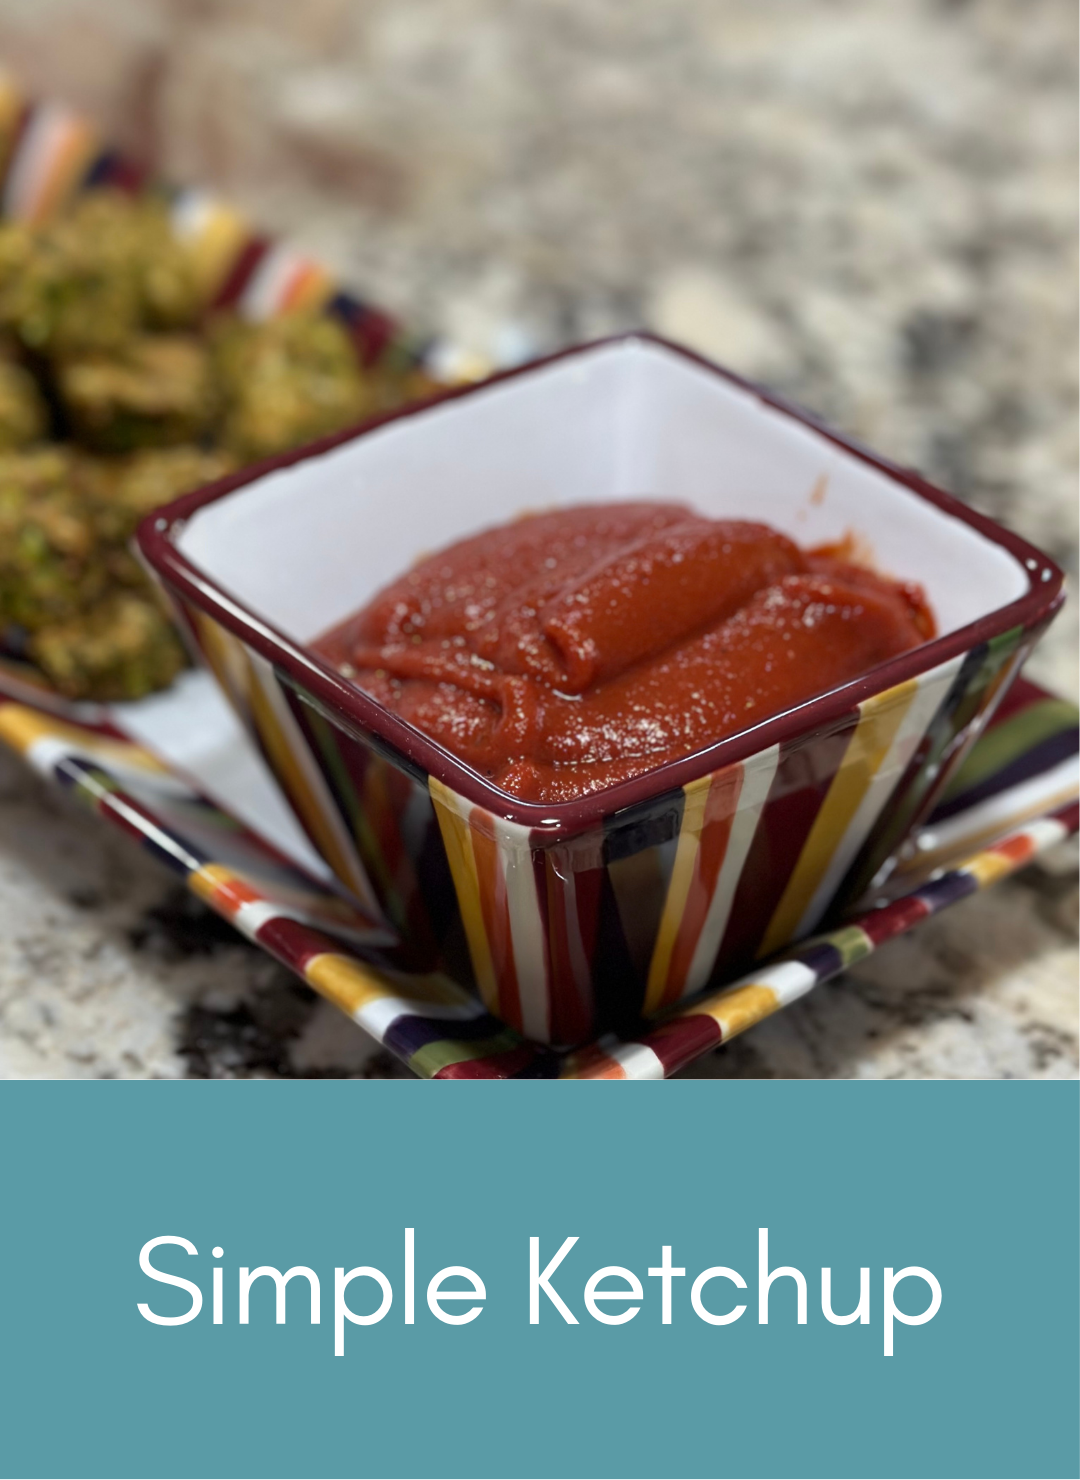 Whole food plant based vegan ketchup Picture with link to recipe